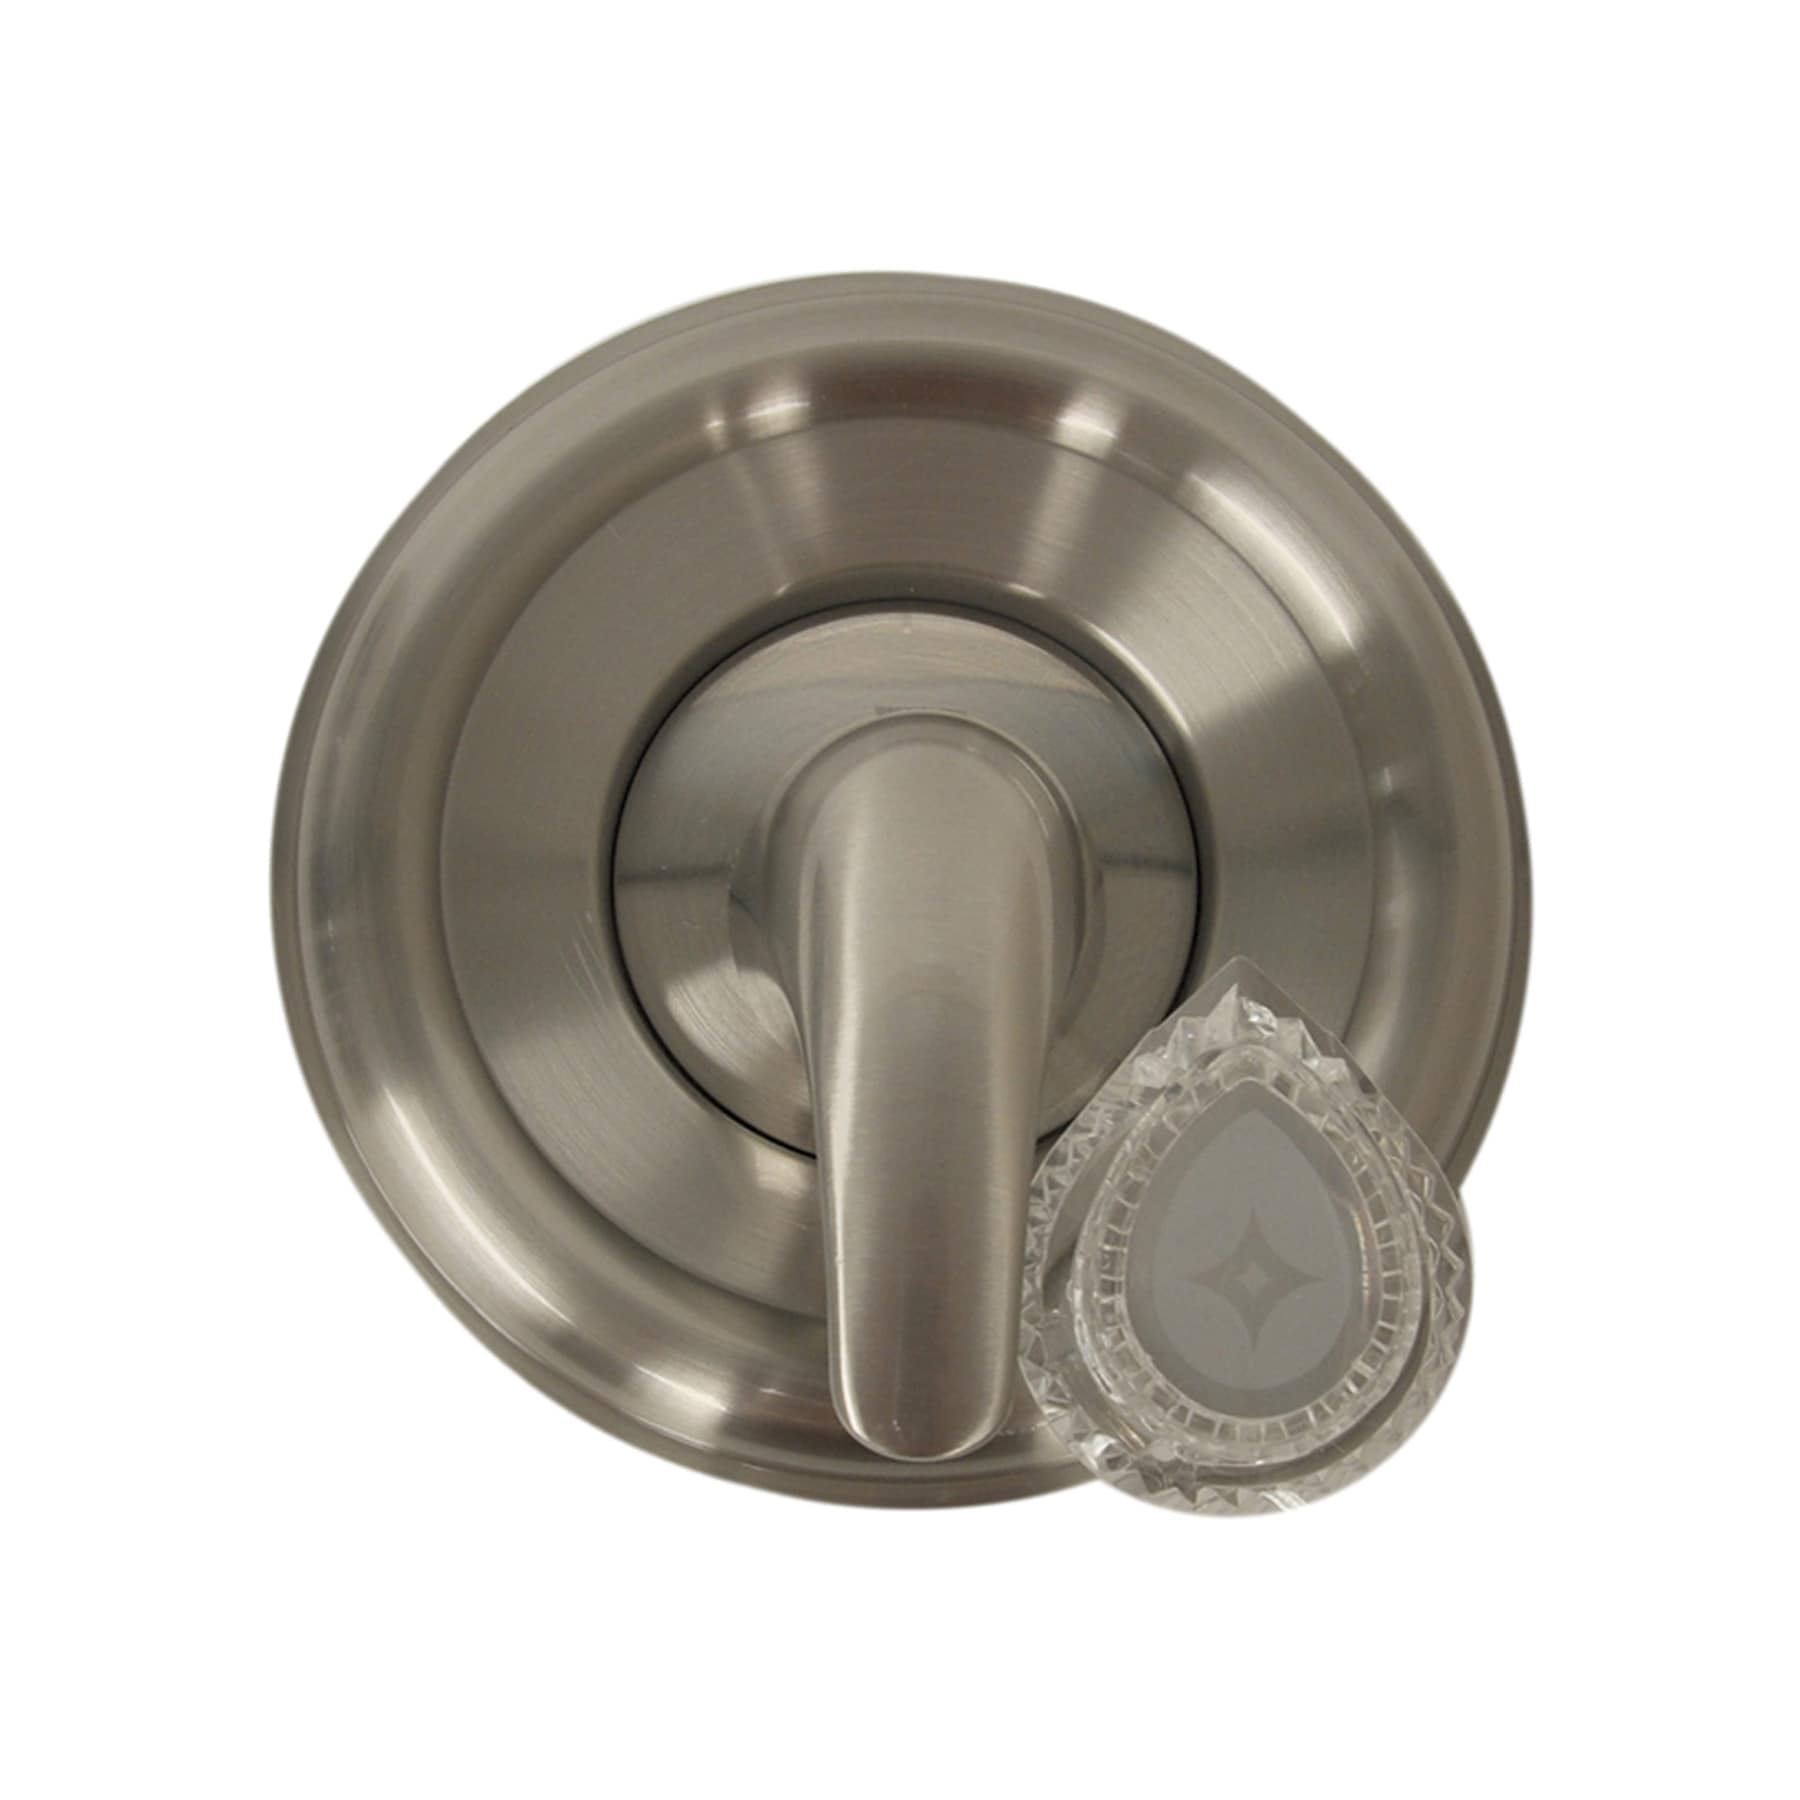 Satin Nickel All-in-One Measures